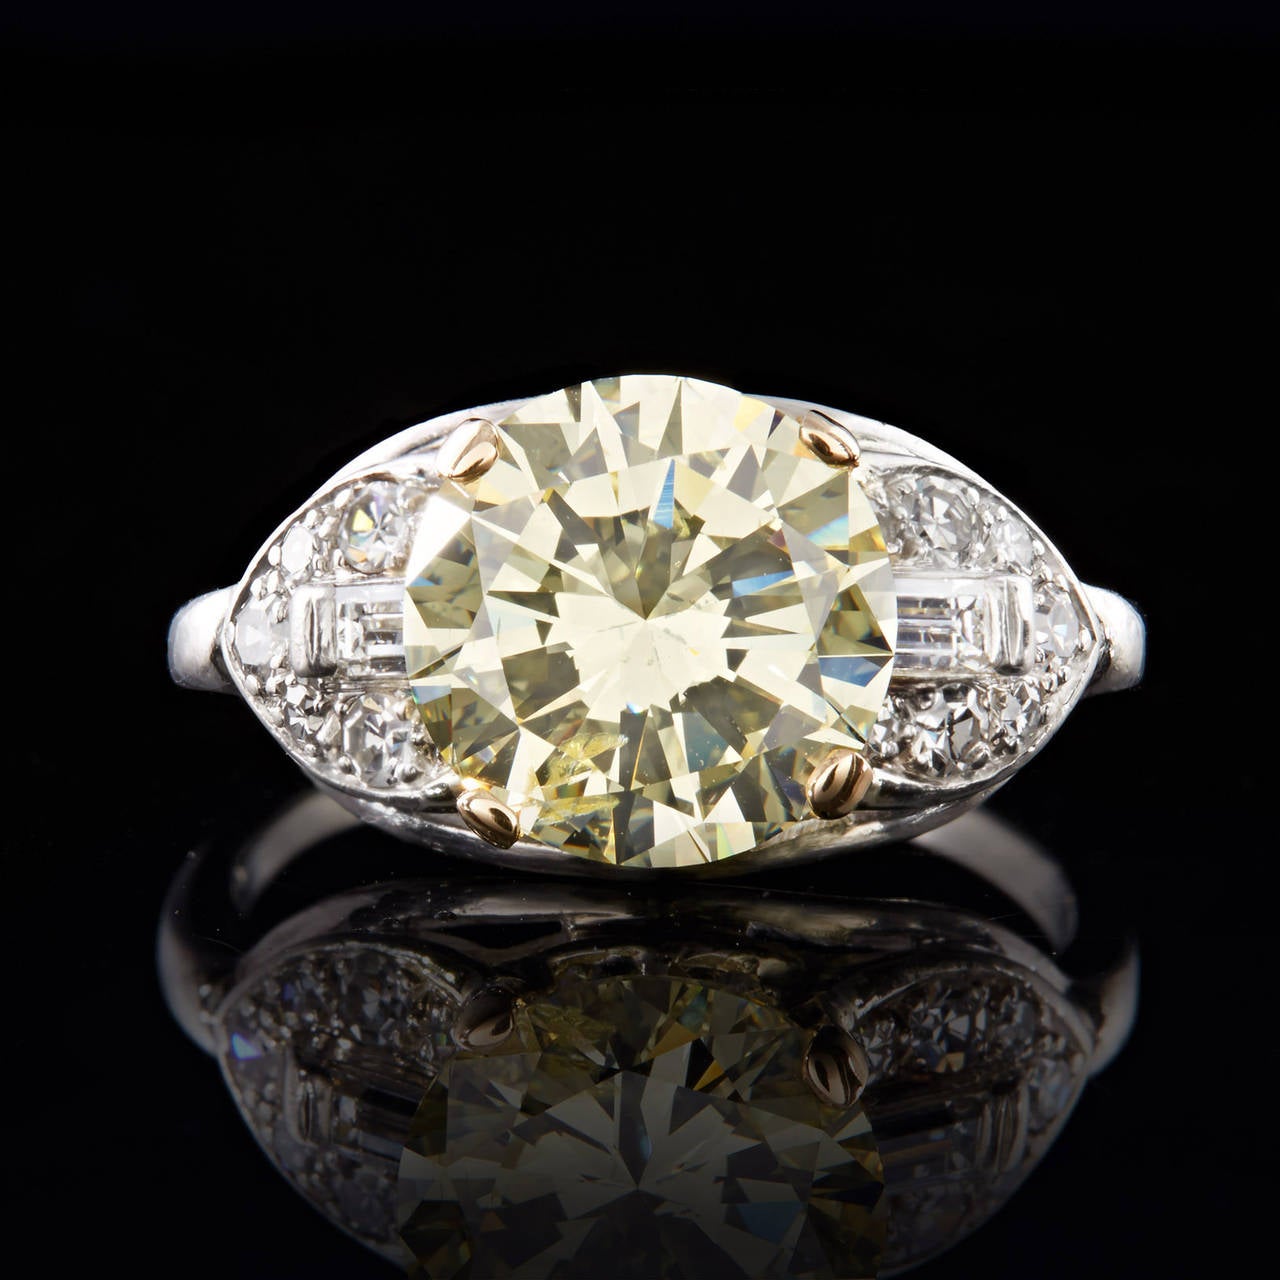 This Platinum Art Deco Diamond Ring features a 3.53 carat Light Yellow Center Stone SI2 clarity Round Brilliant Cut Diamond set in a 4 prong yellow gold mounting.  Accented around the center stone are F-G VS quality single cut diamonds and baguette